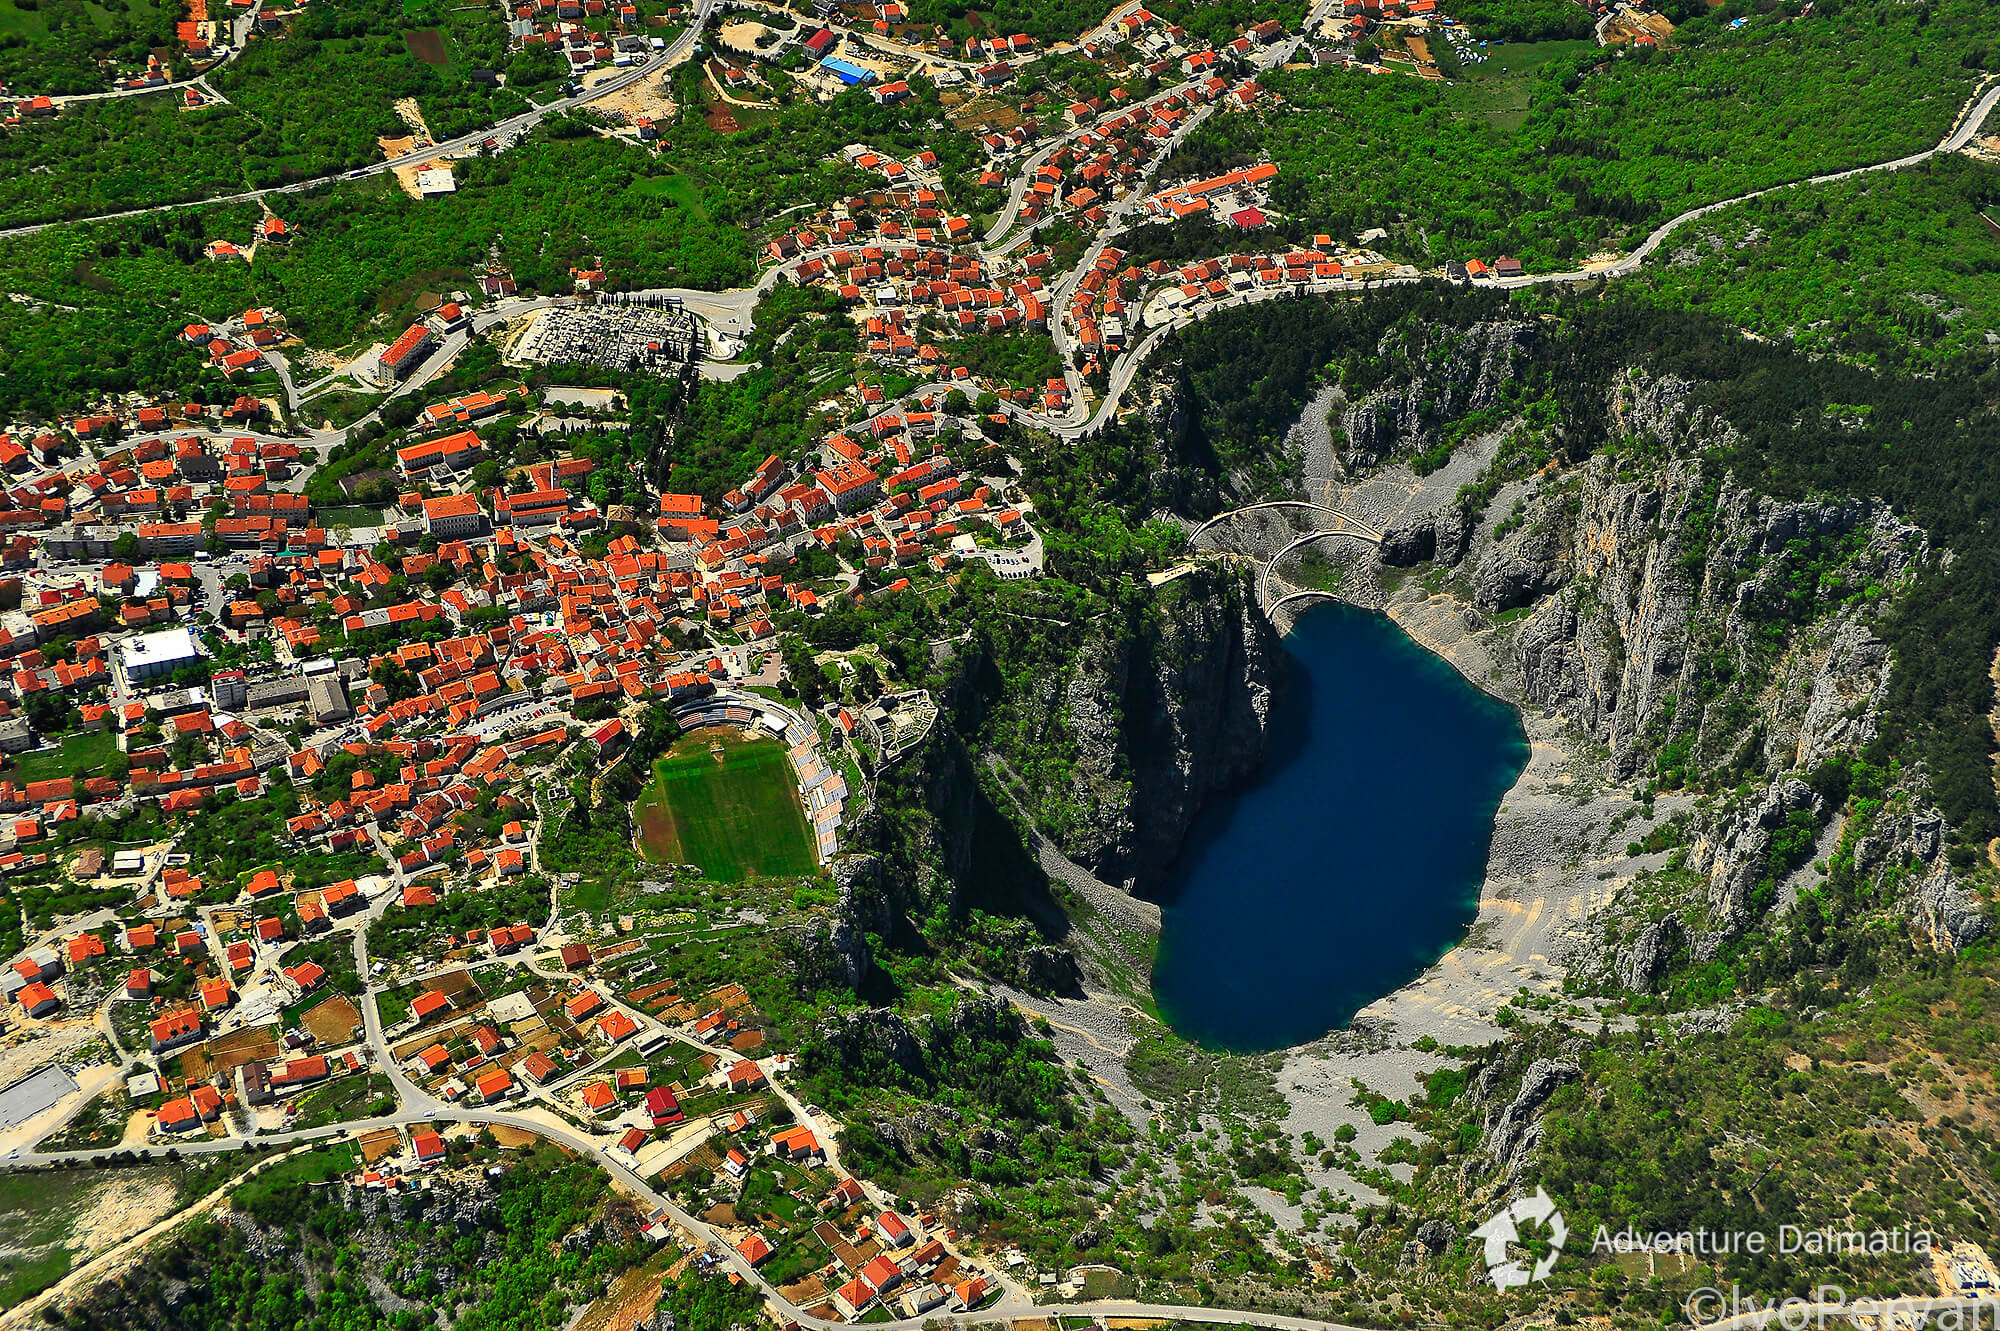 The Blue lake and Imotski city are situated 30 min driving distance from Zadvarje village.